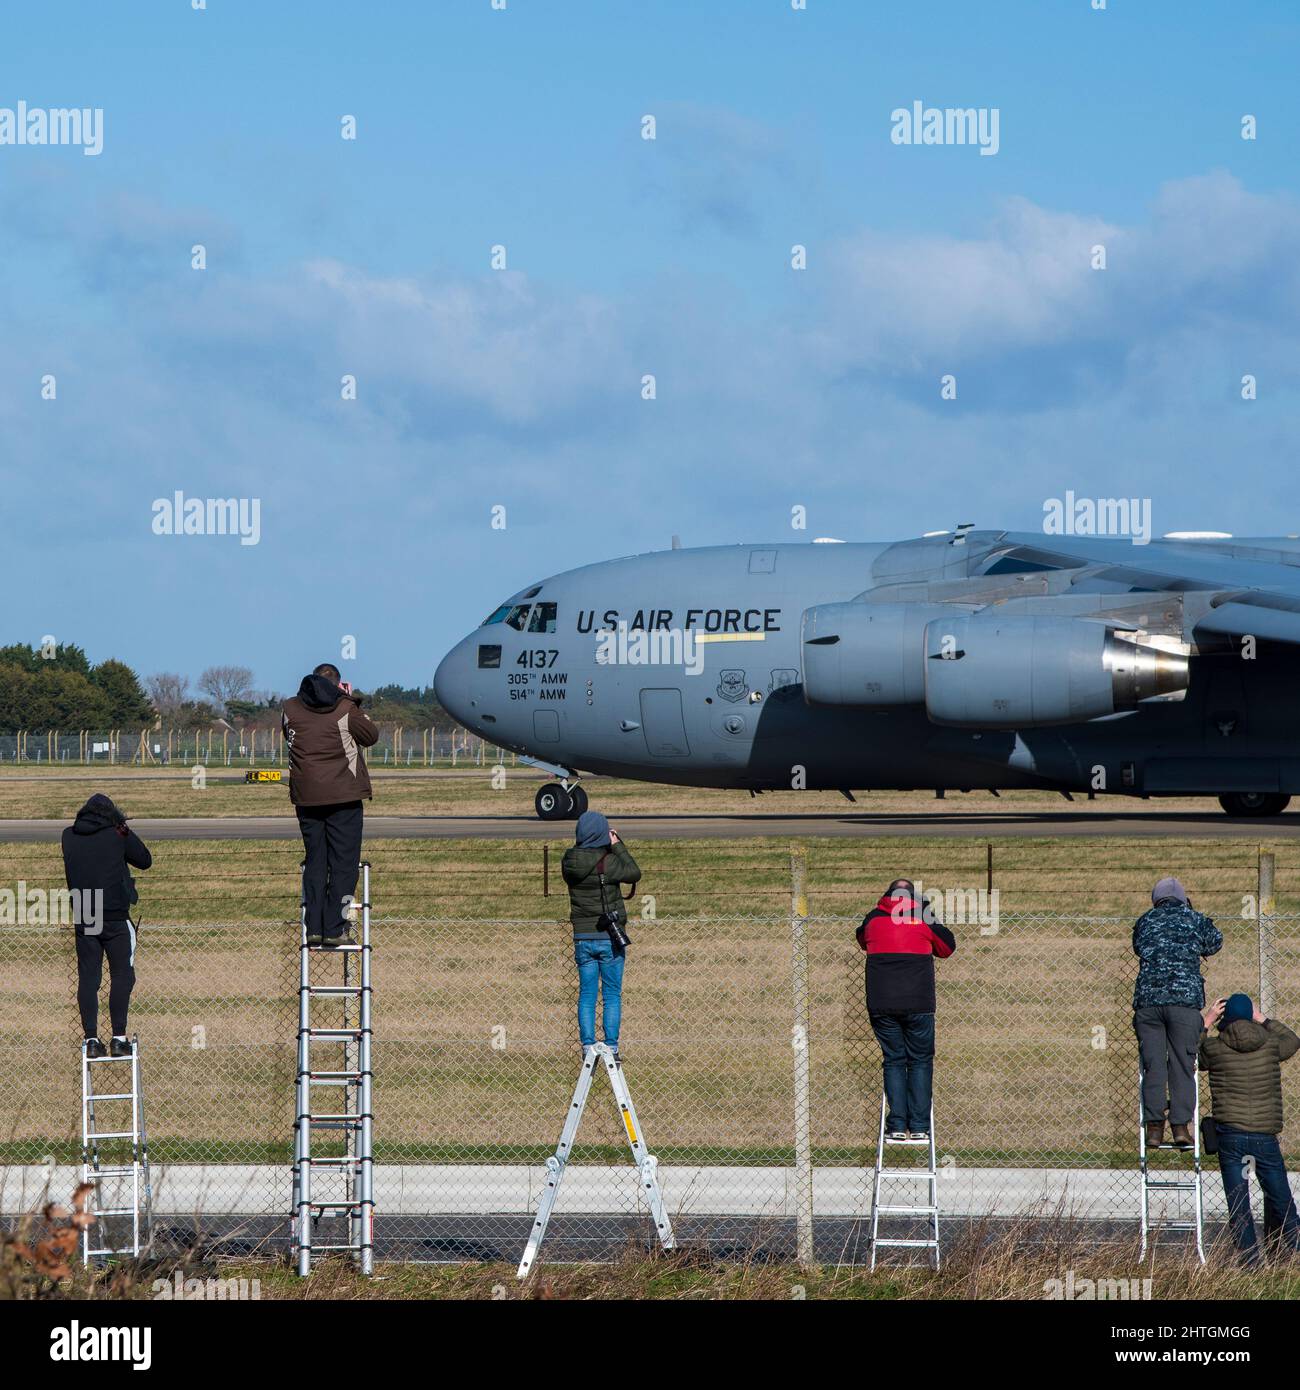 Plane spotters at Mildehall Air Field taking pictures of  Boeing C-17 Globemaster III taxi-ing Stock Photo